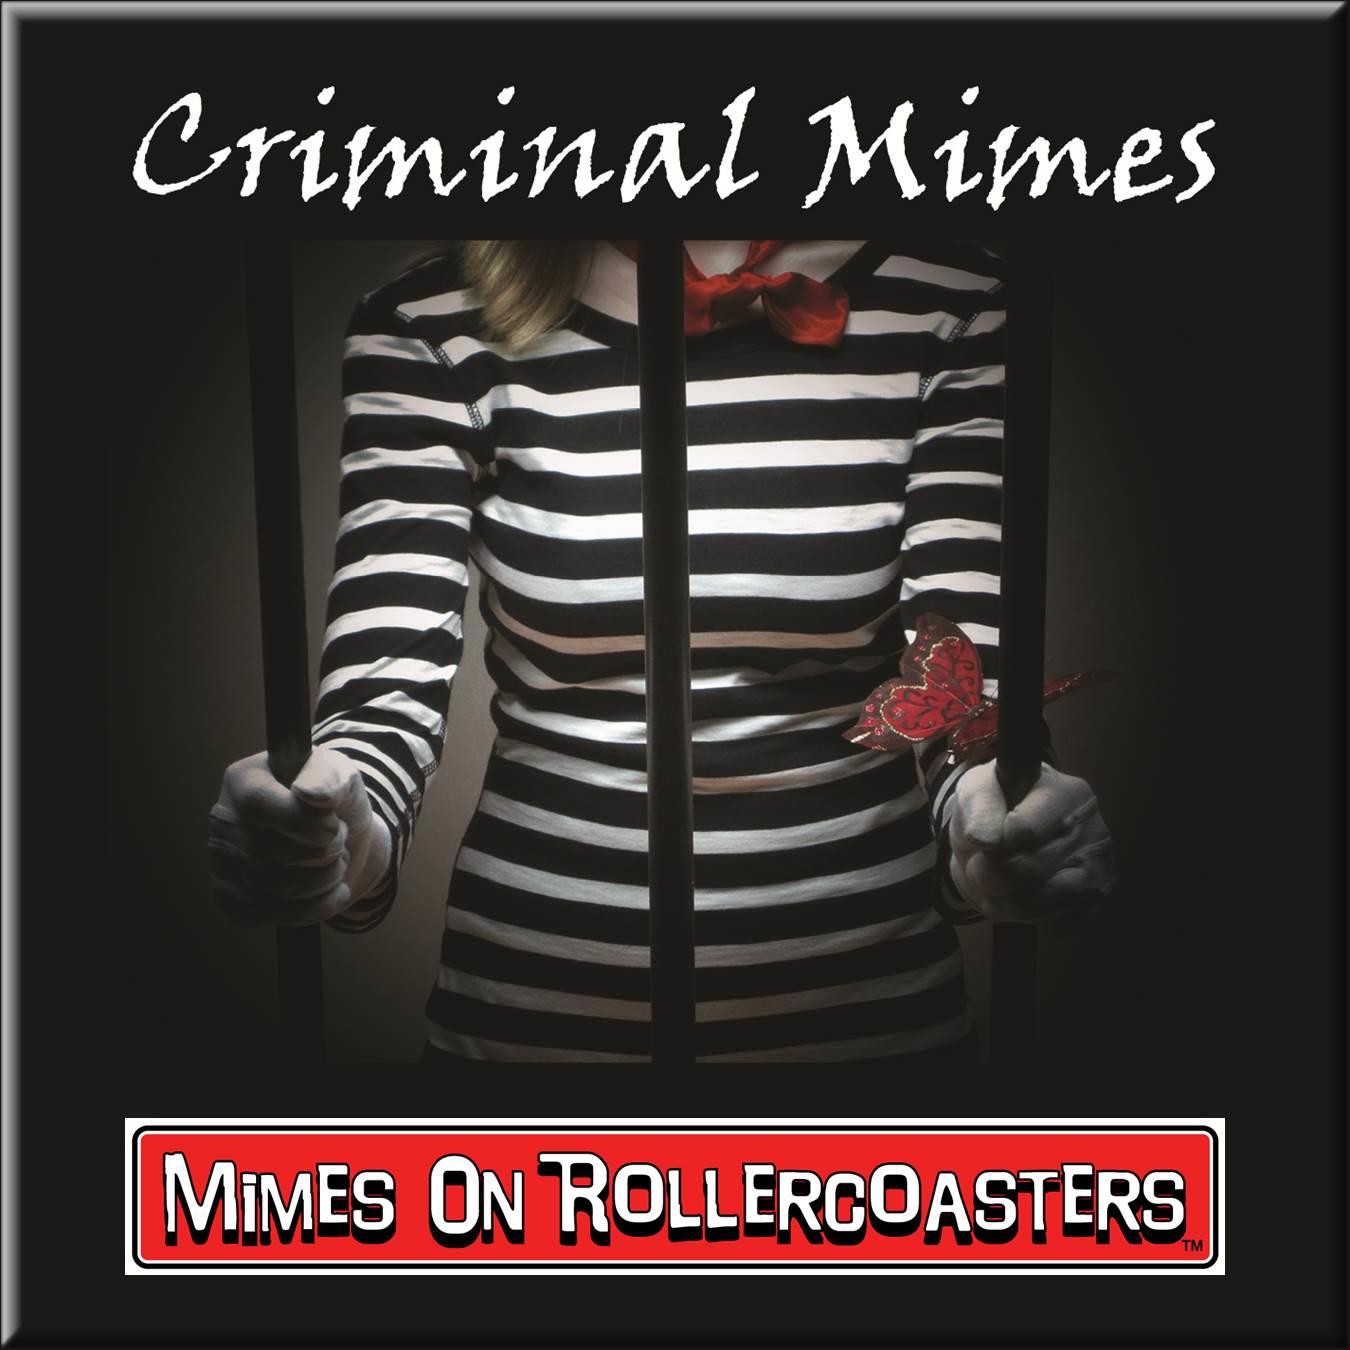 Mimes On Rollercoasters™ - Criminal Mimes (Album)